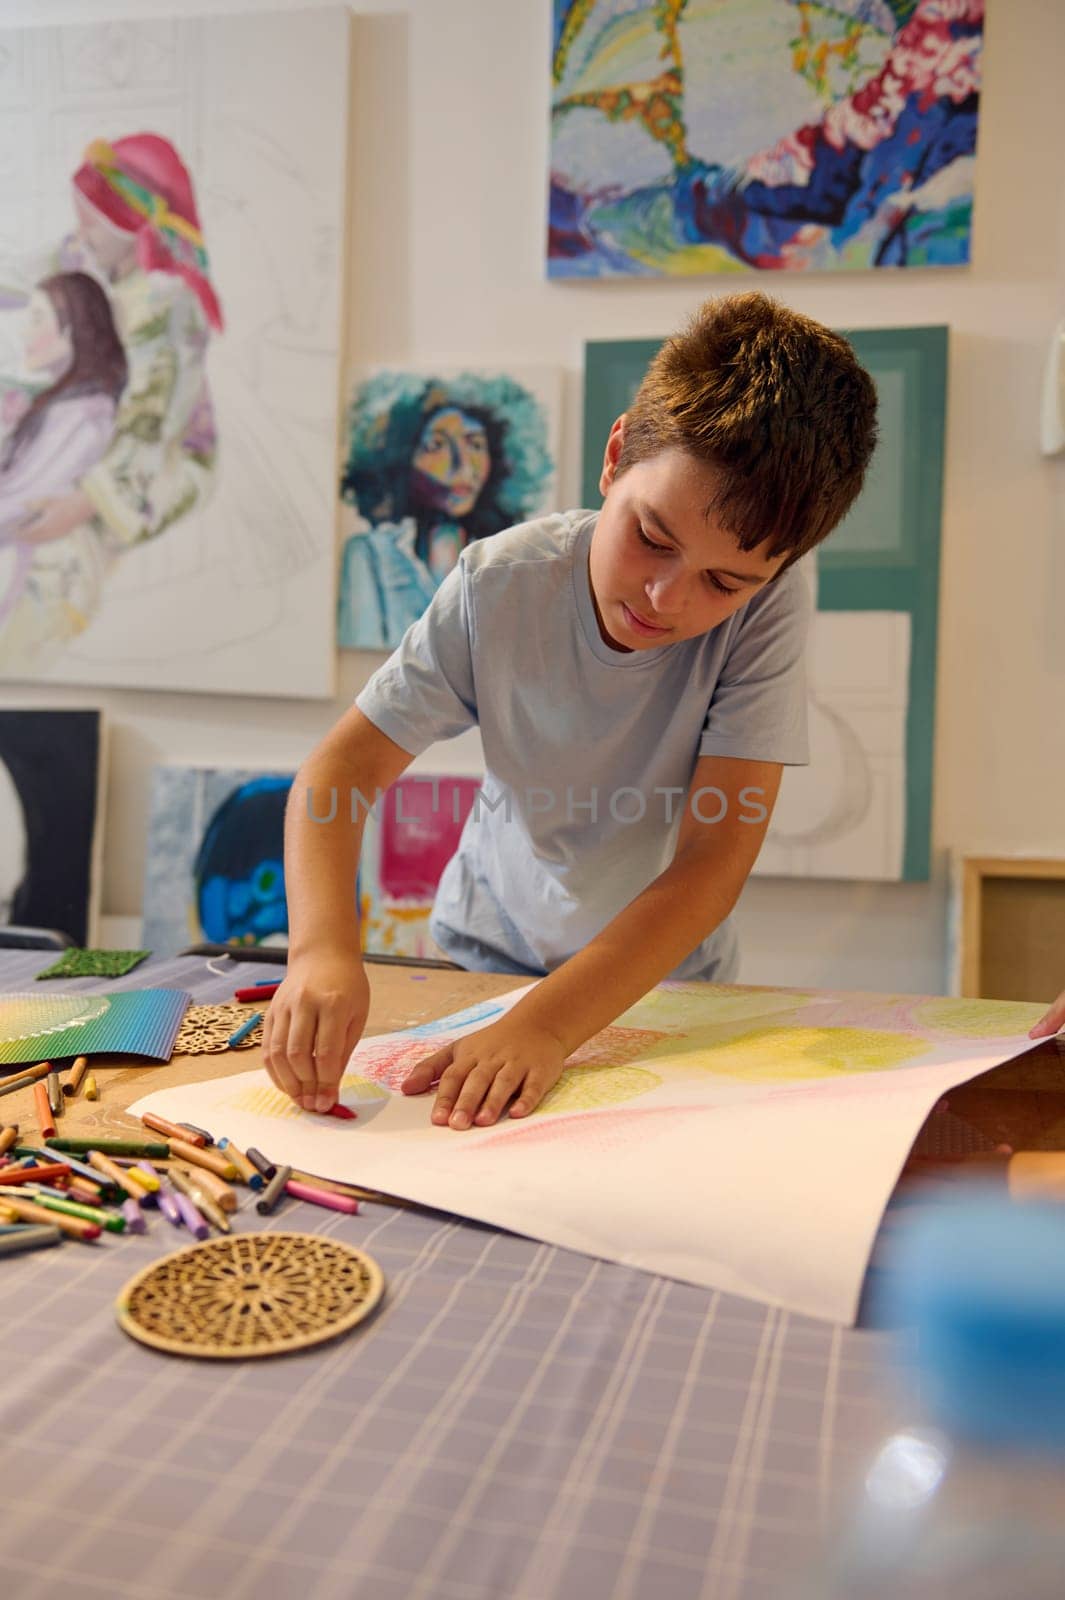 Teenage schoolboy drawing with pastel pencils on a white paper sheet